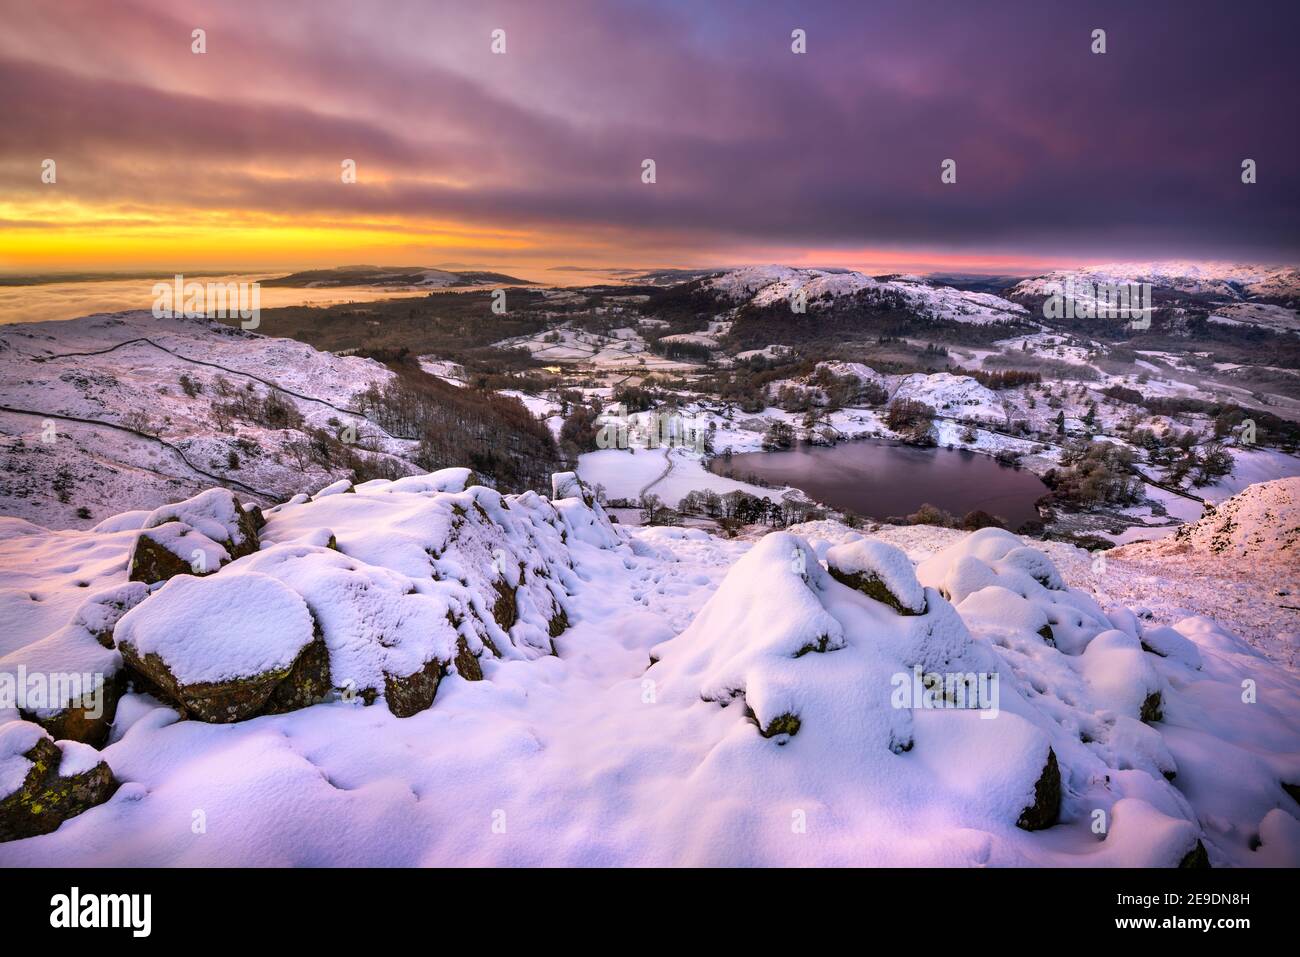 Beautiful Winter sunrise with pink and purple hues reflecting on fresh covering of snow. Loughrigg Fell, Lake District, UK. Stock Photo